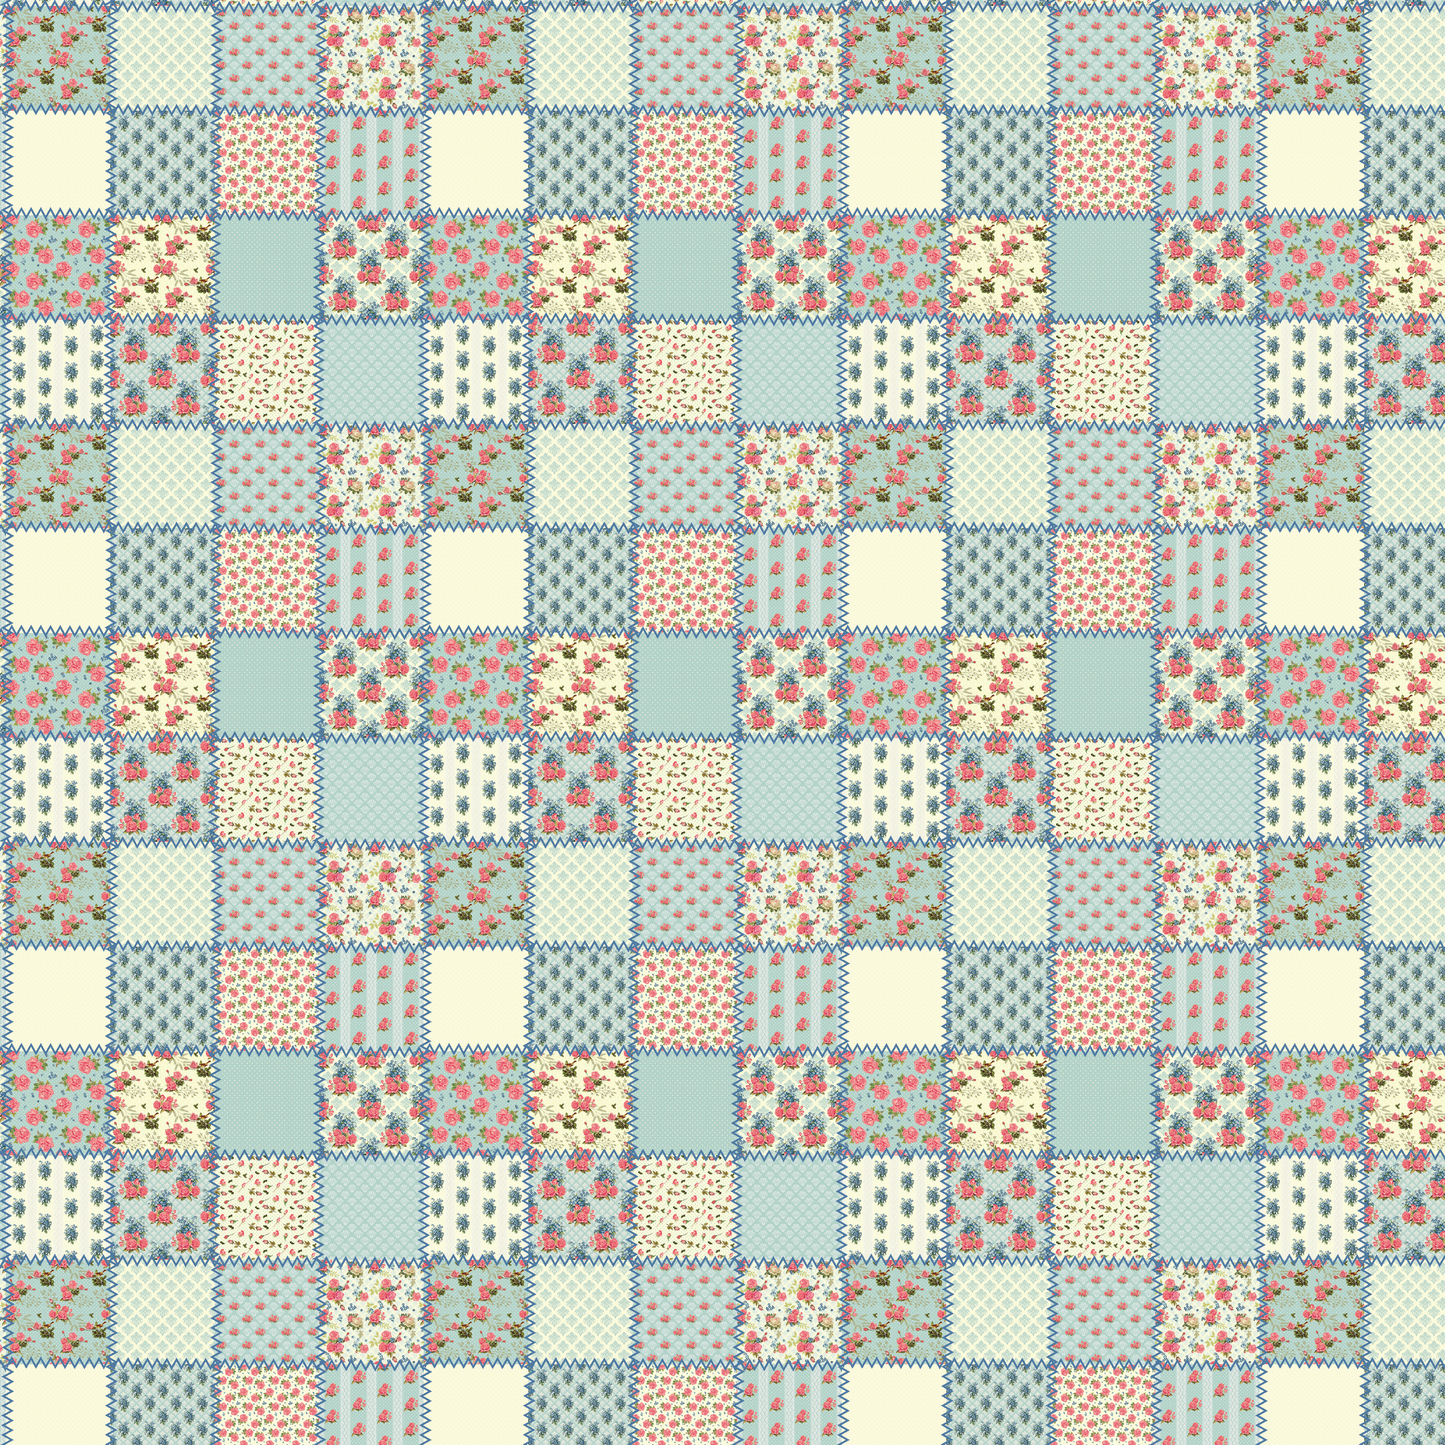 Patchwork - Light Blue and Beige 008